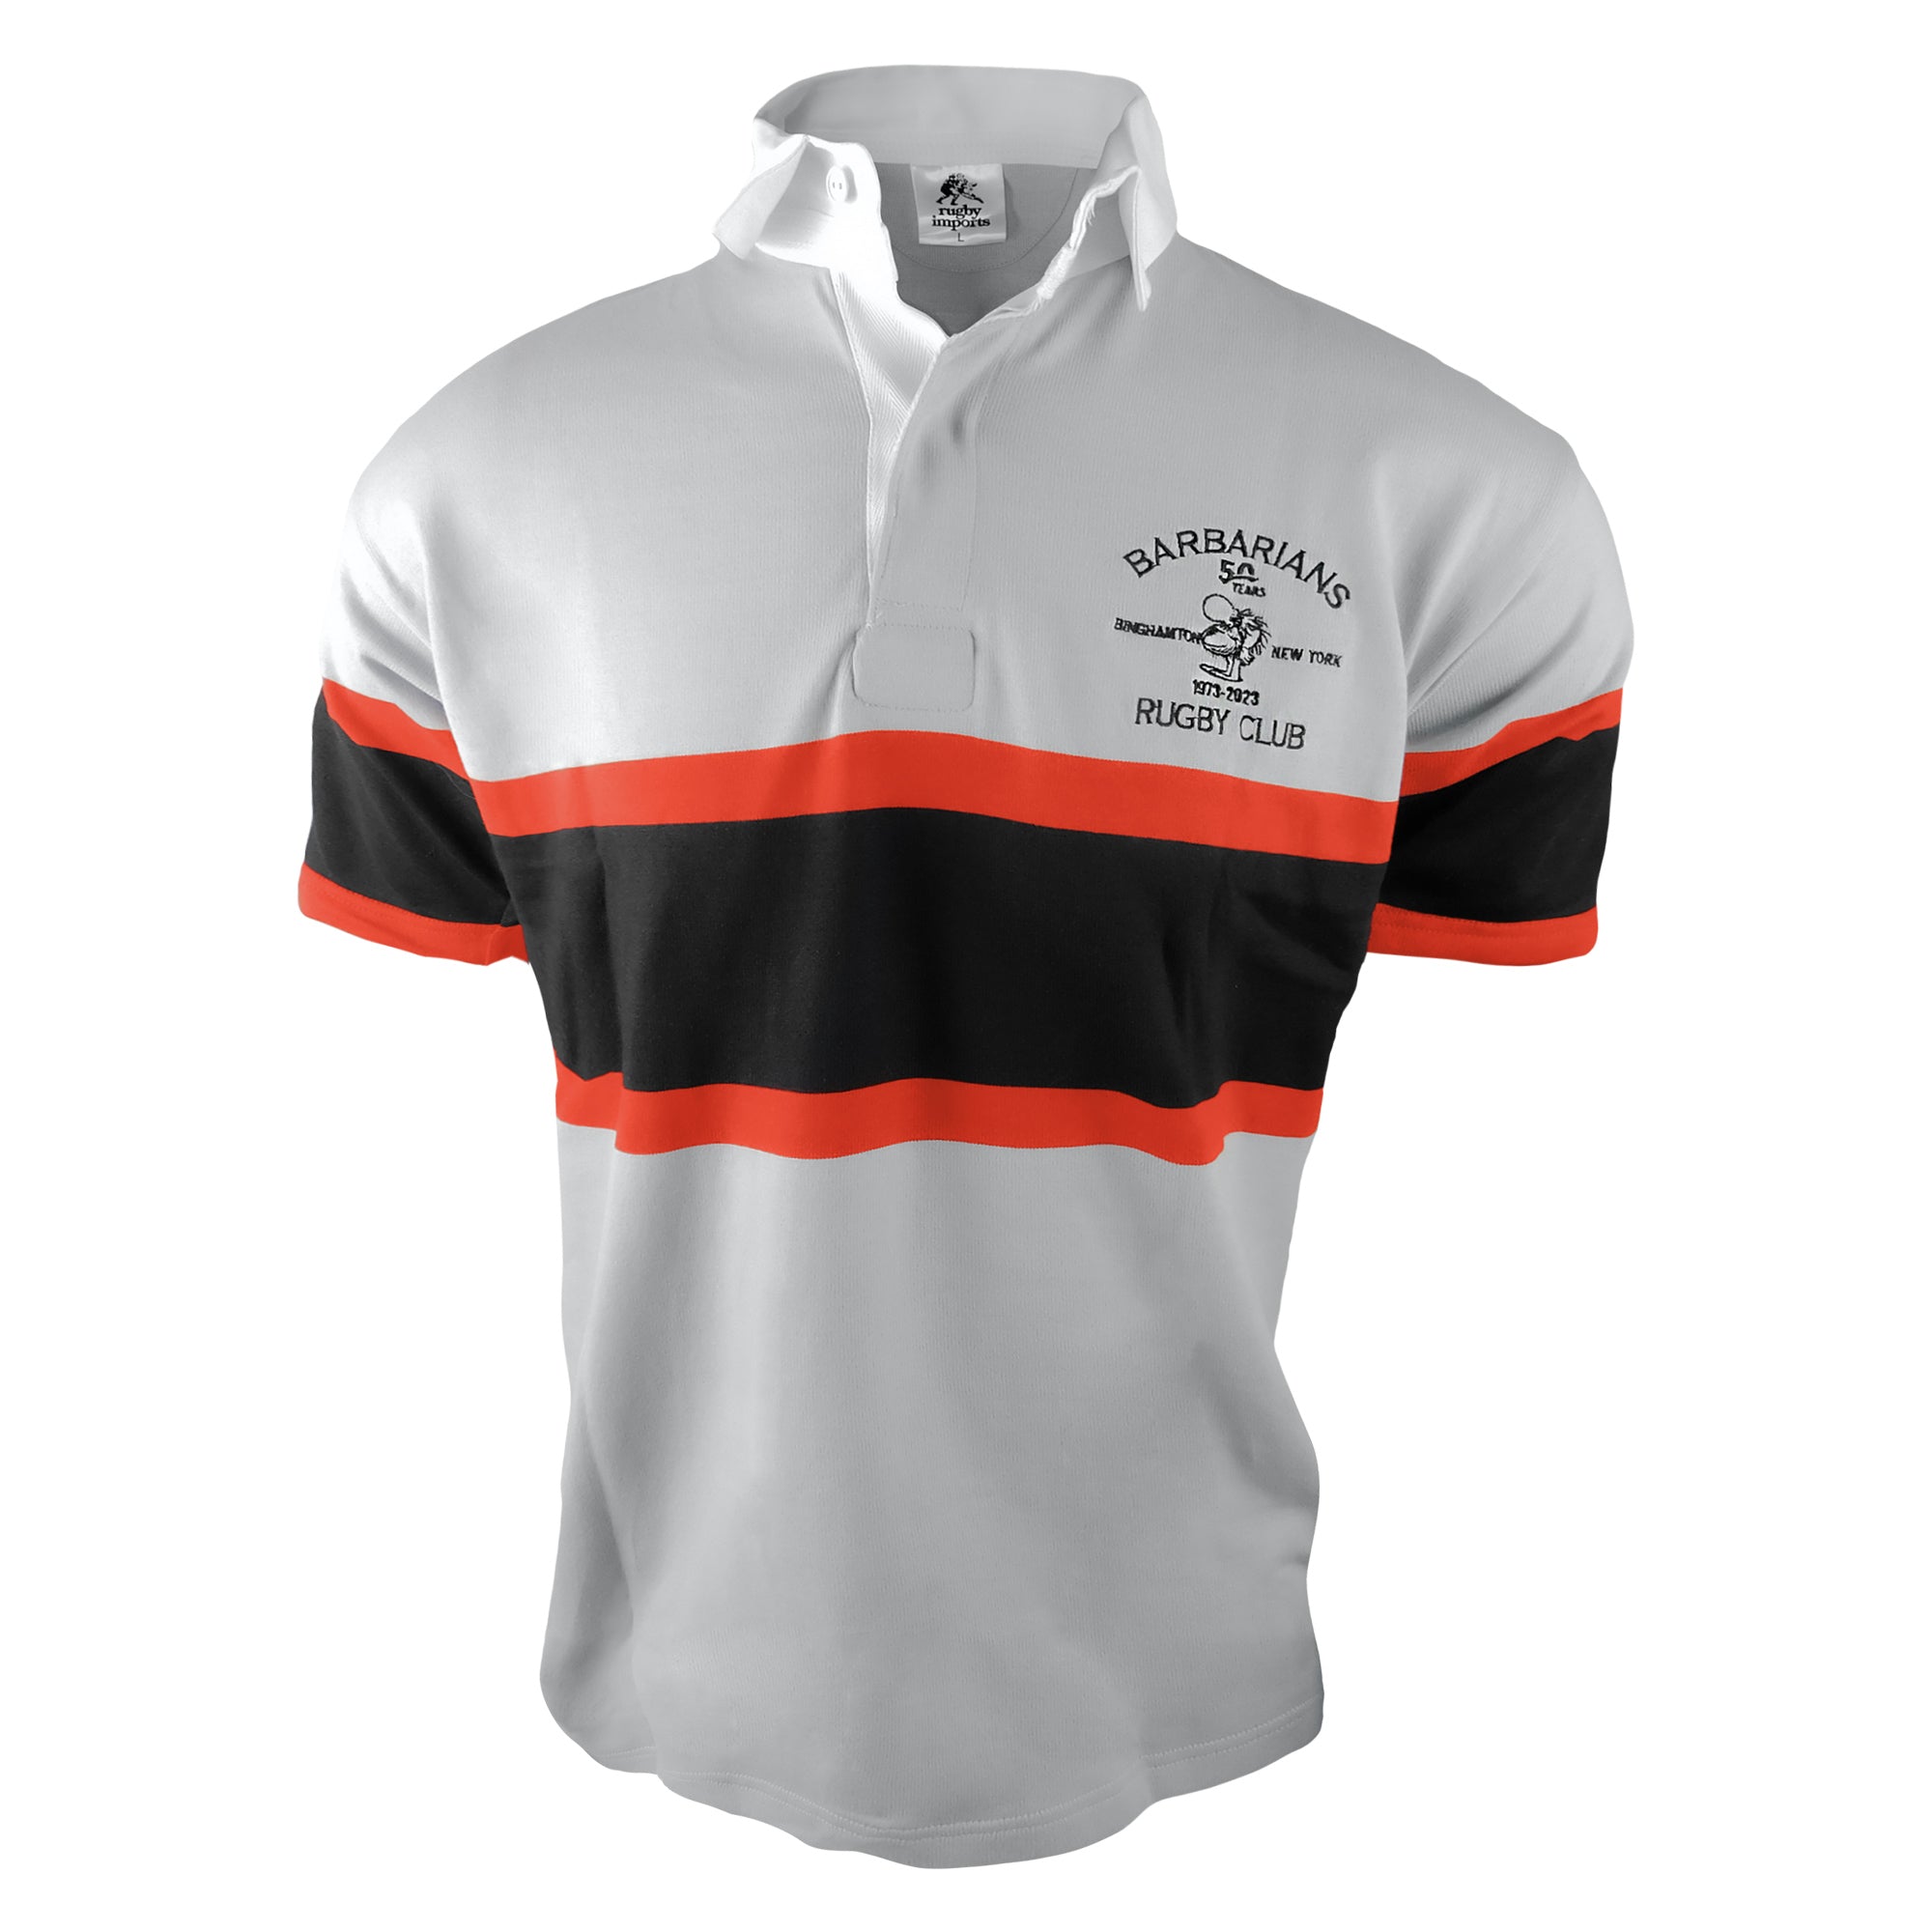 Rugby Imports Binghamton Barbarians 50th Anniversary Jersey